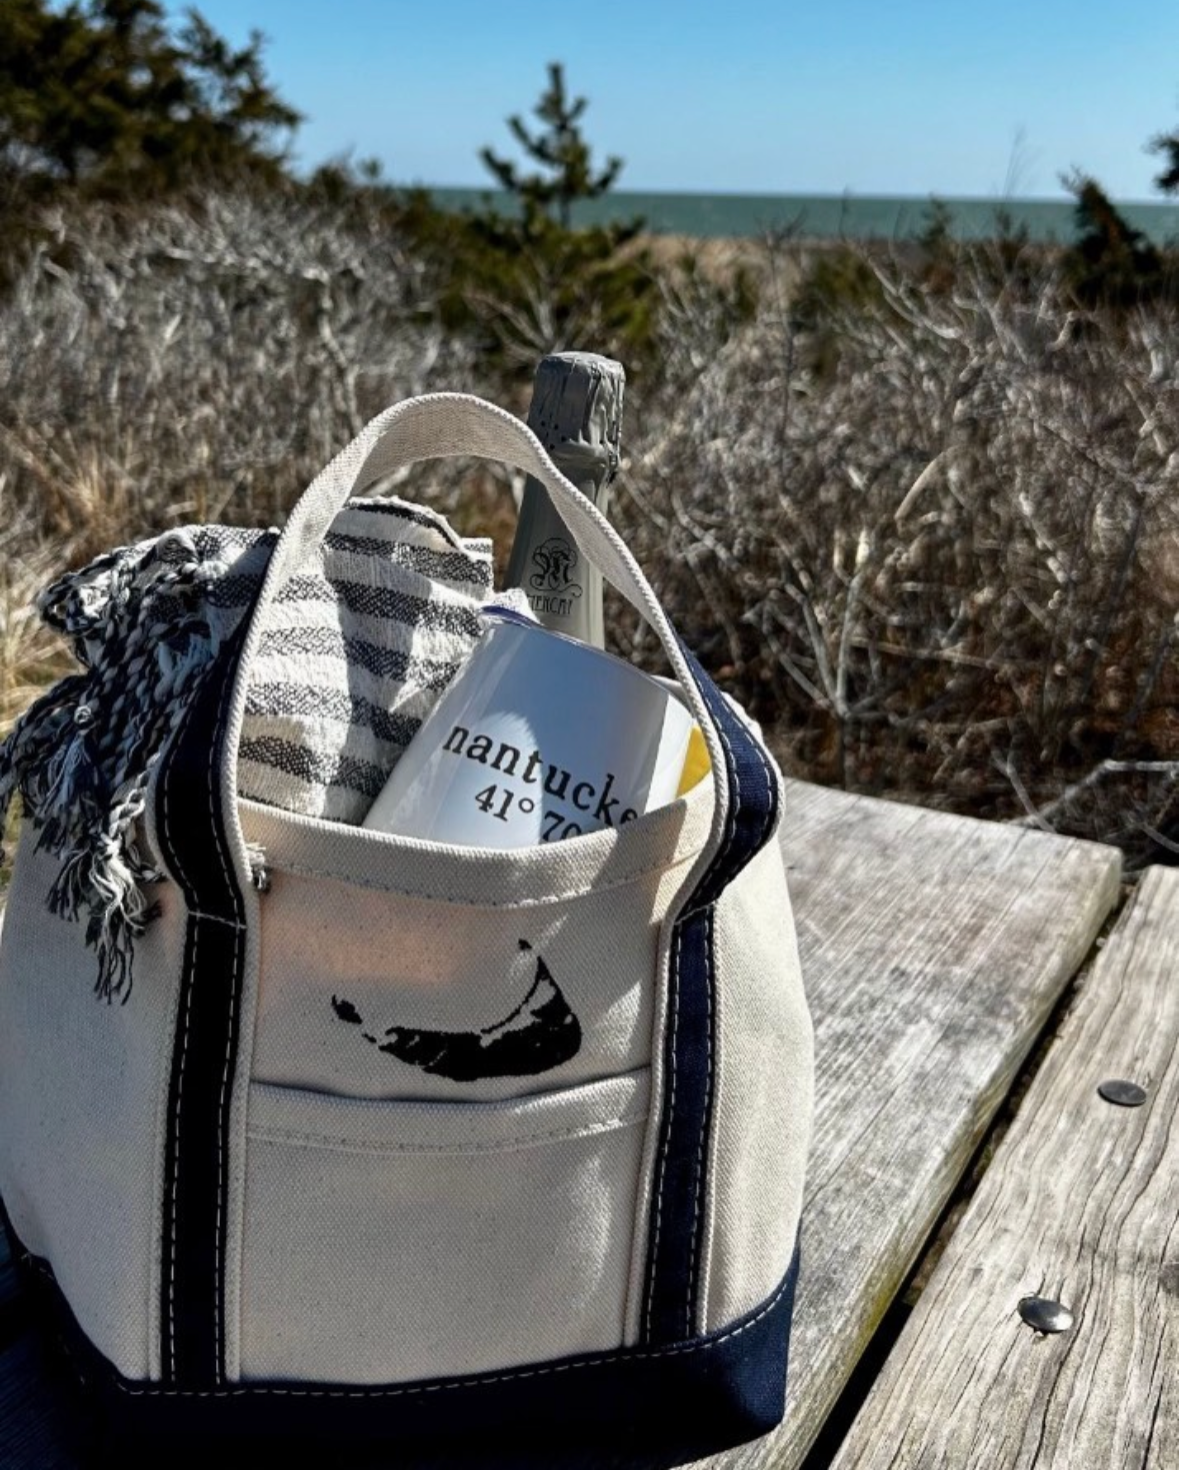 Nantucket Crossbody Tote with Map